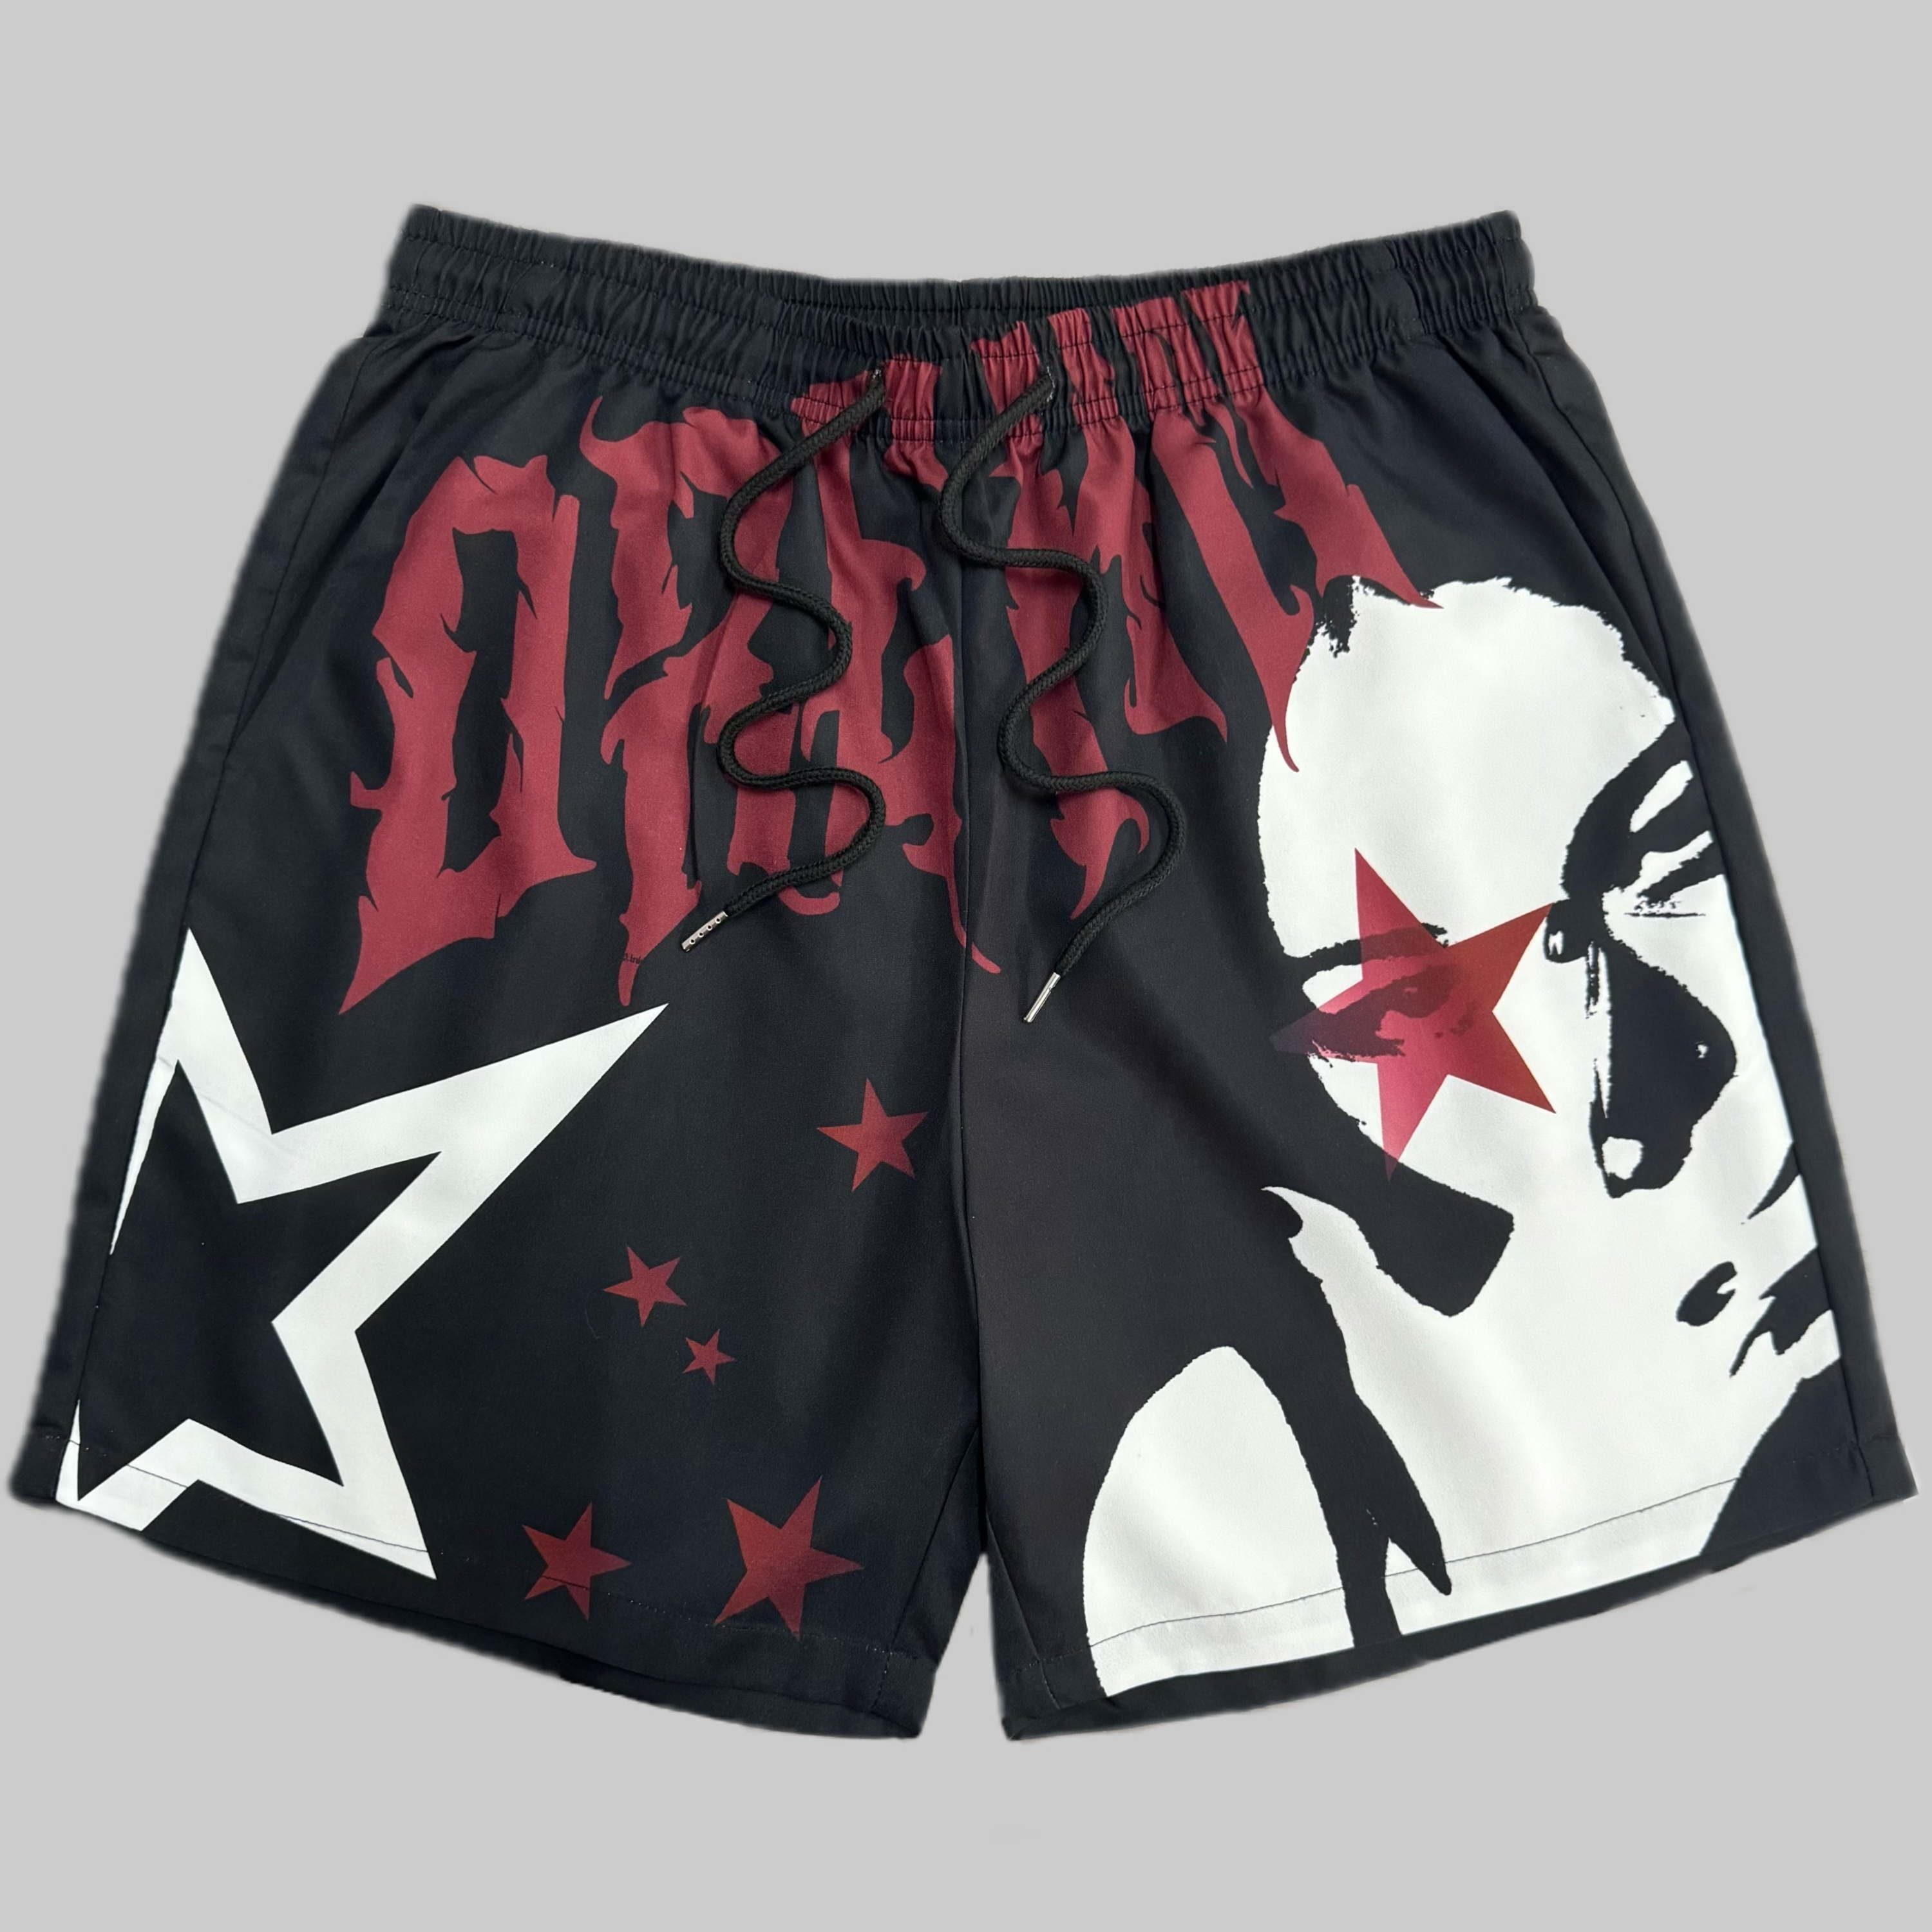 

Men's Summer Fashion Graffiti Style Figure And Star Pattern And Dream Print Shorts, Chic And Stylish Drawstring Shorts For Summer Street Leisurewear